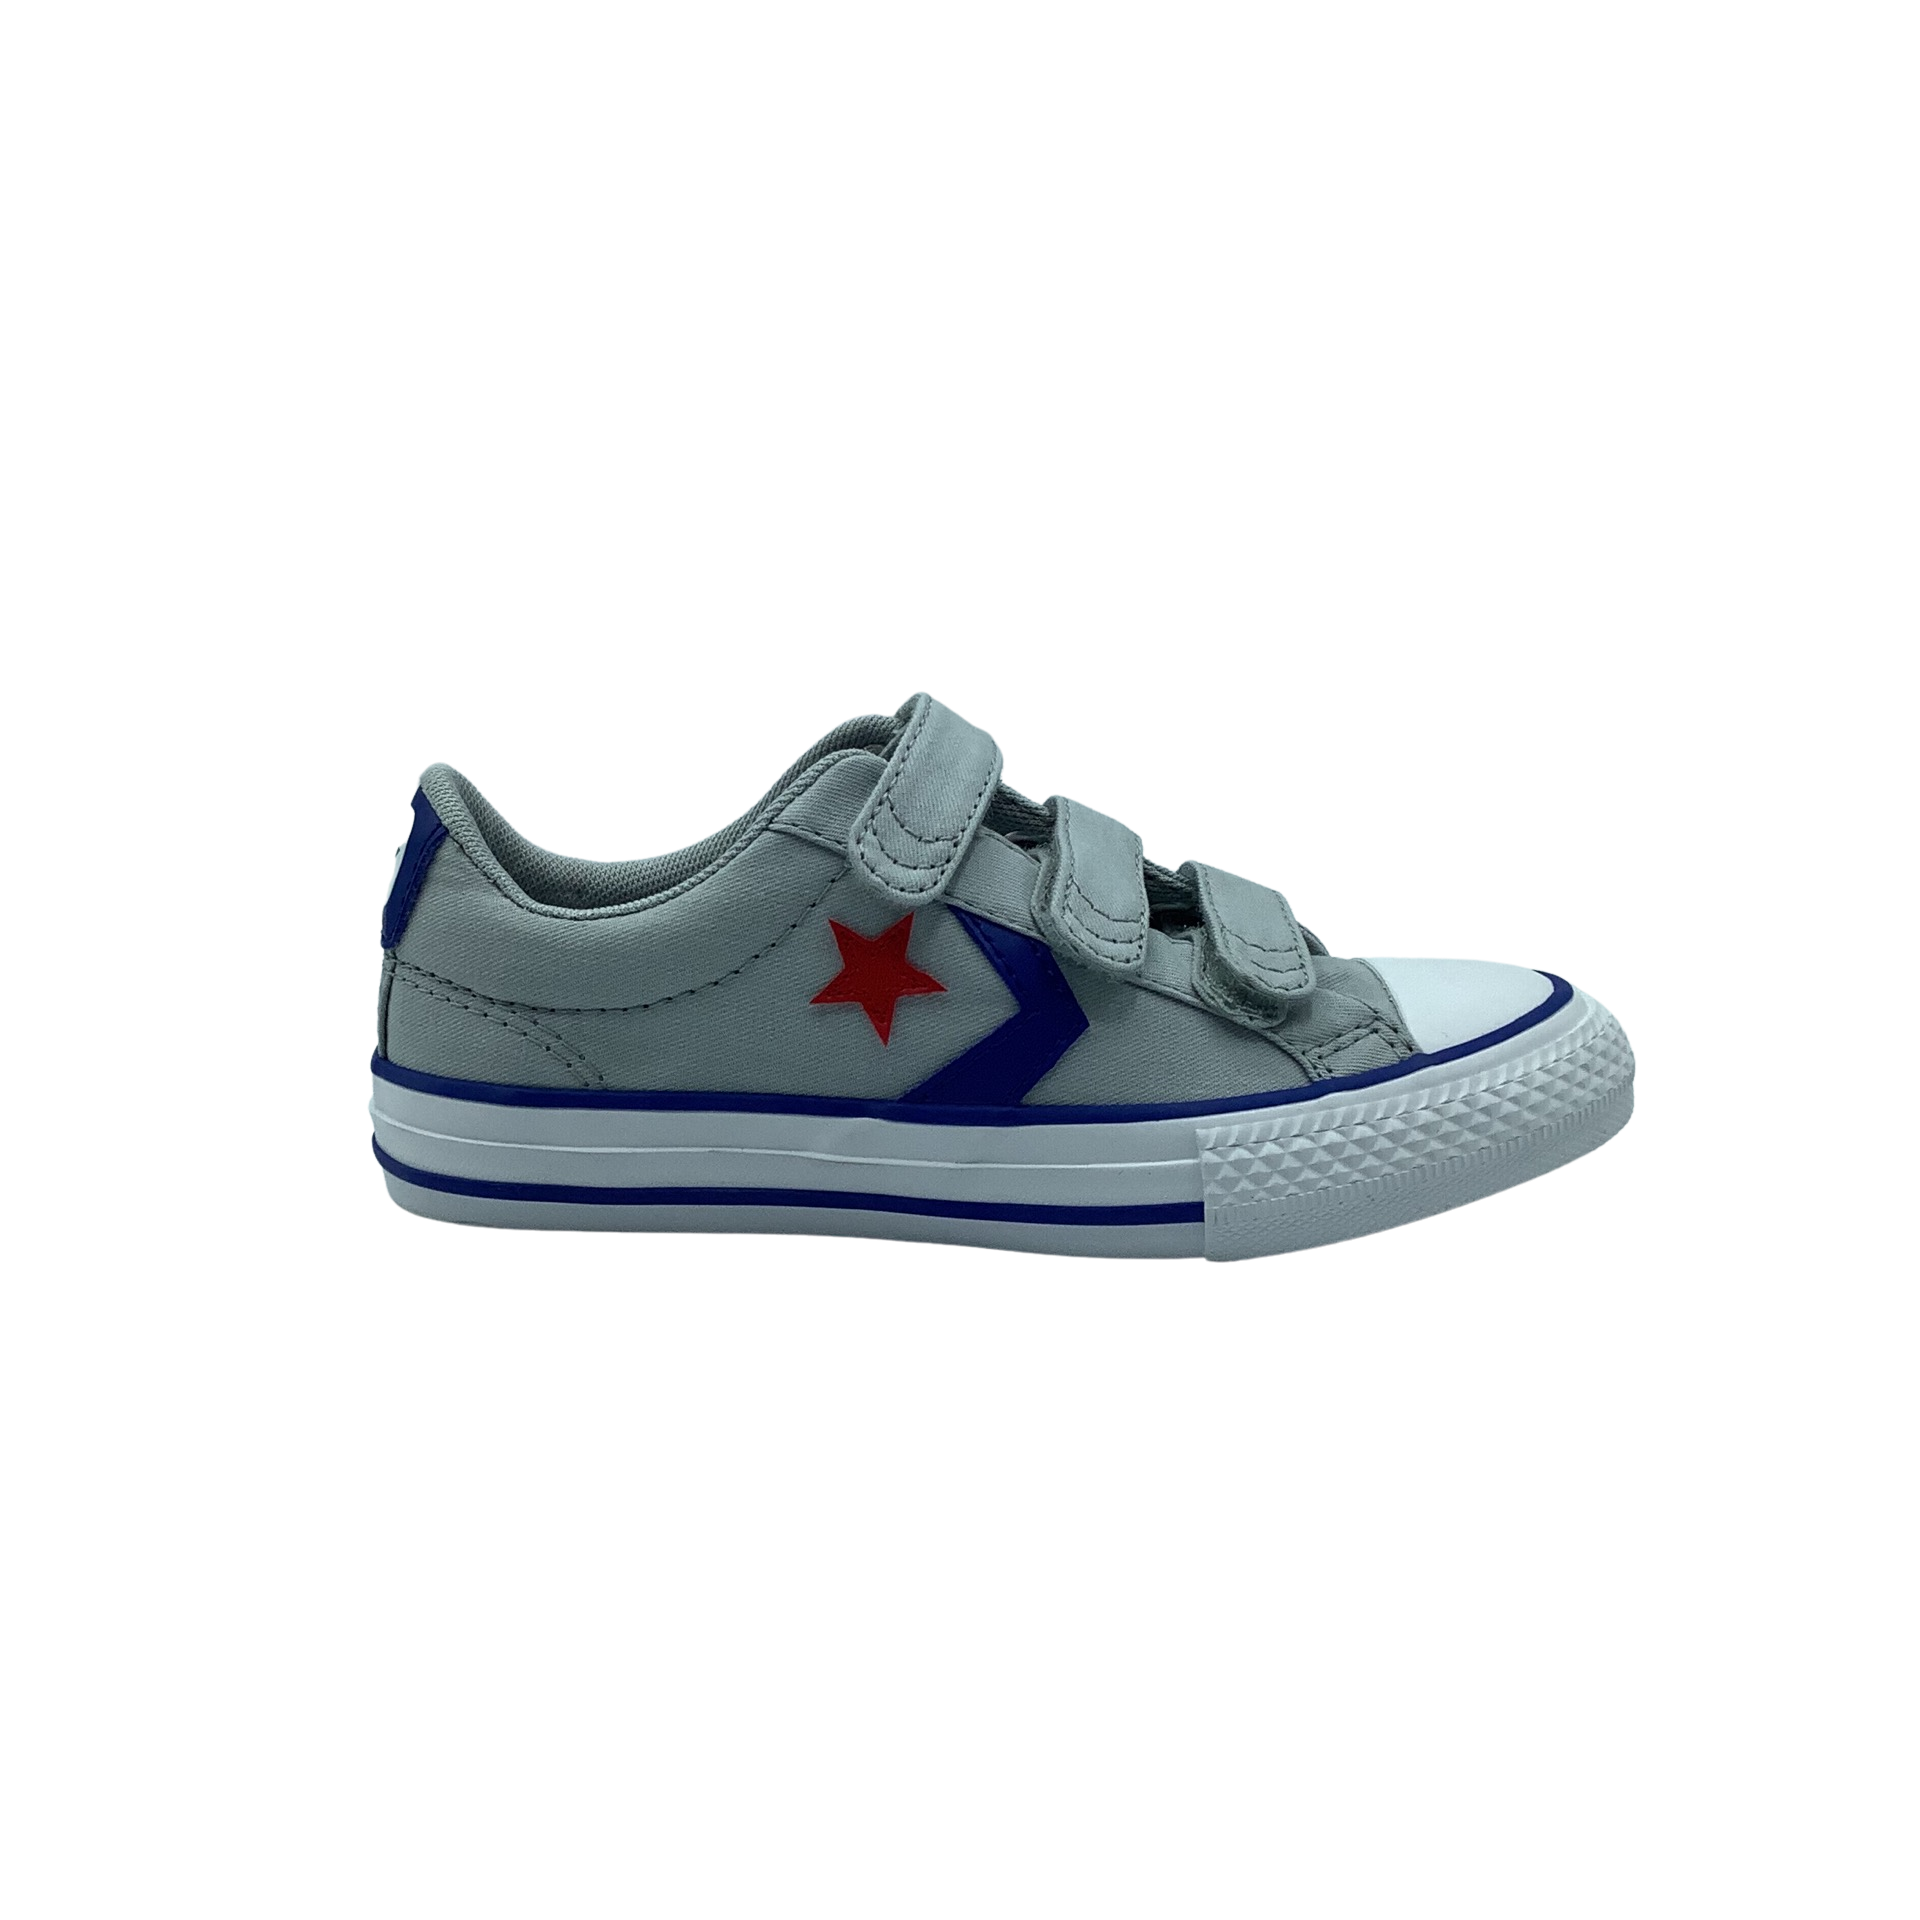 Converse STAR PLAYER 3V – Sports Uptown